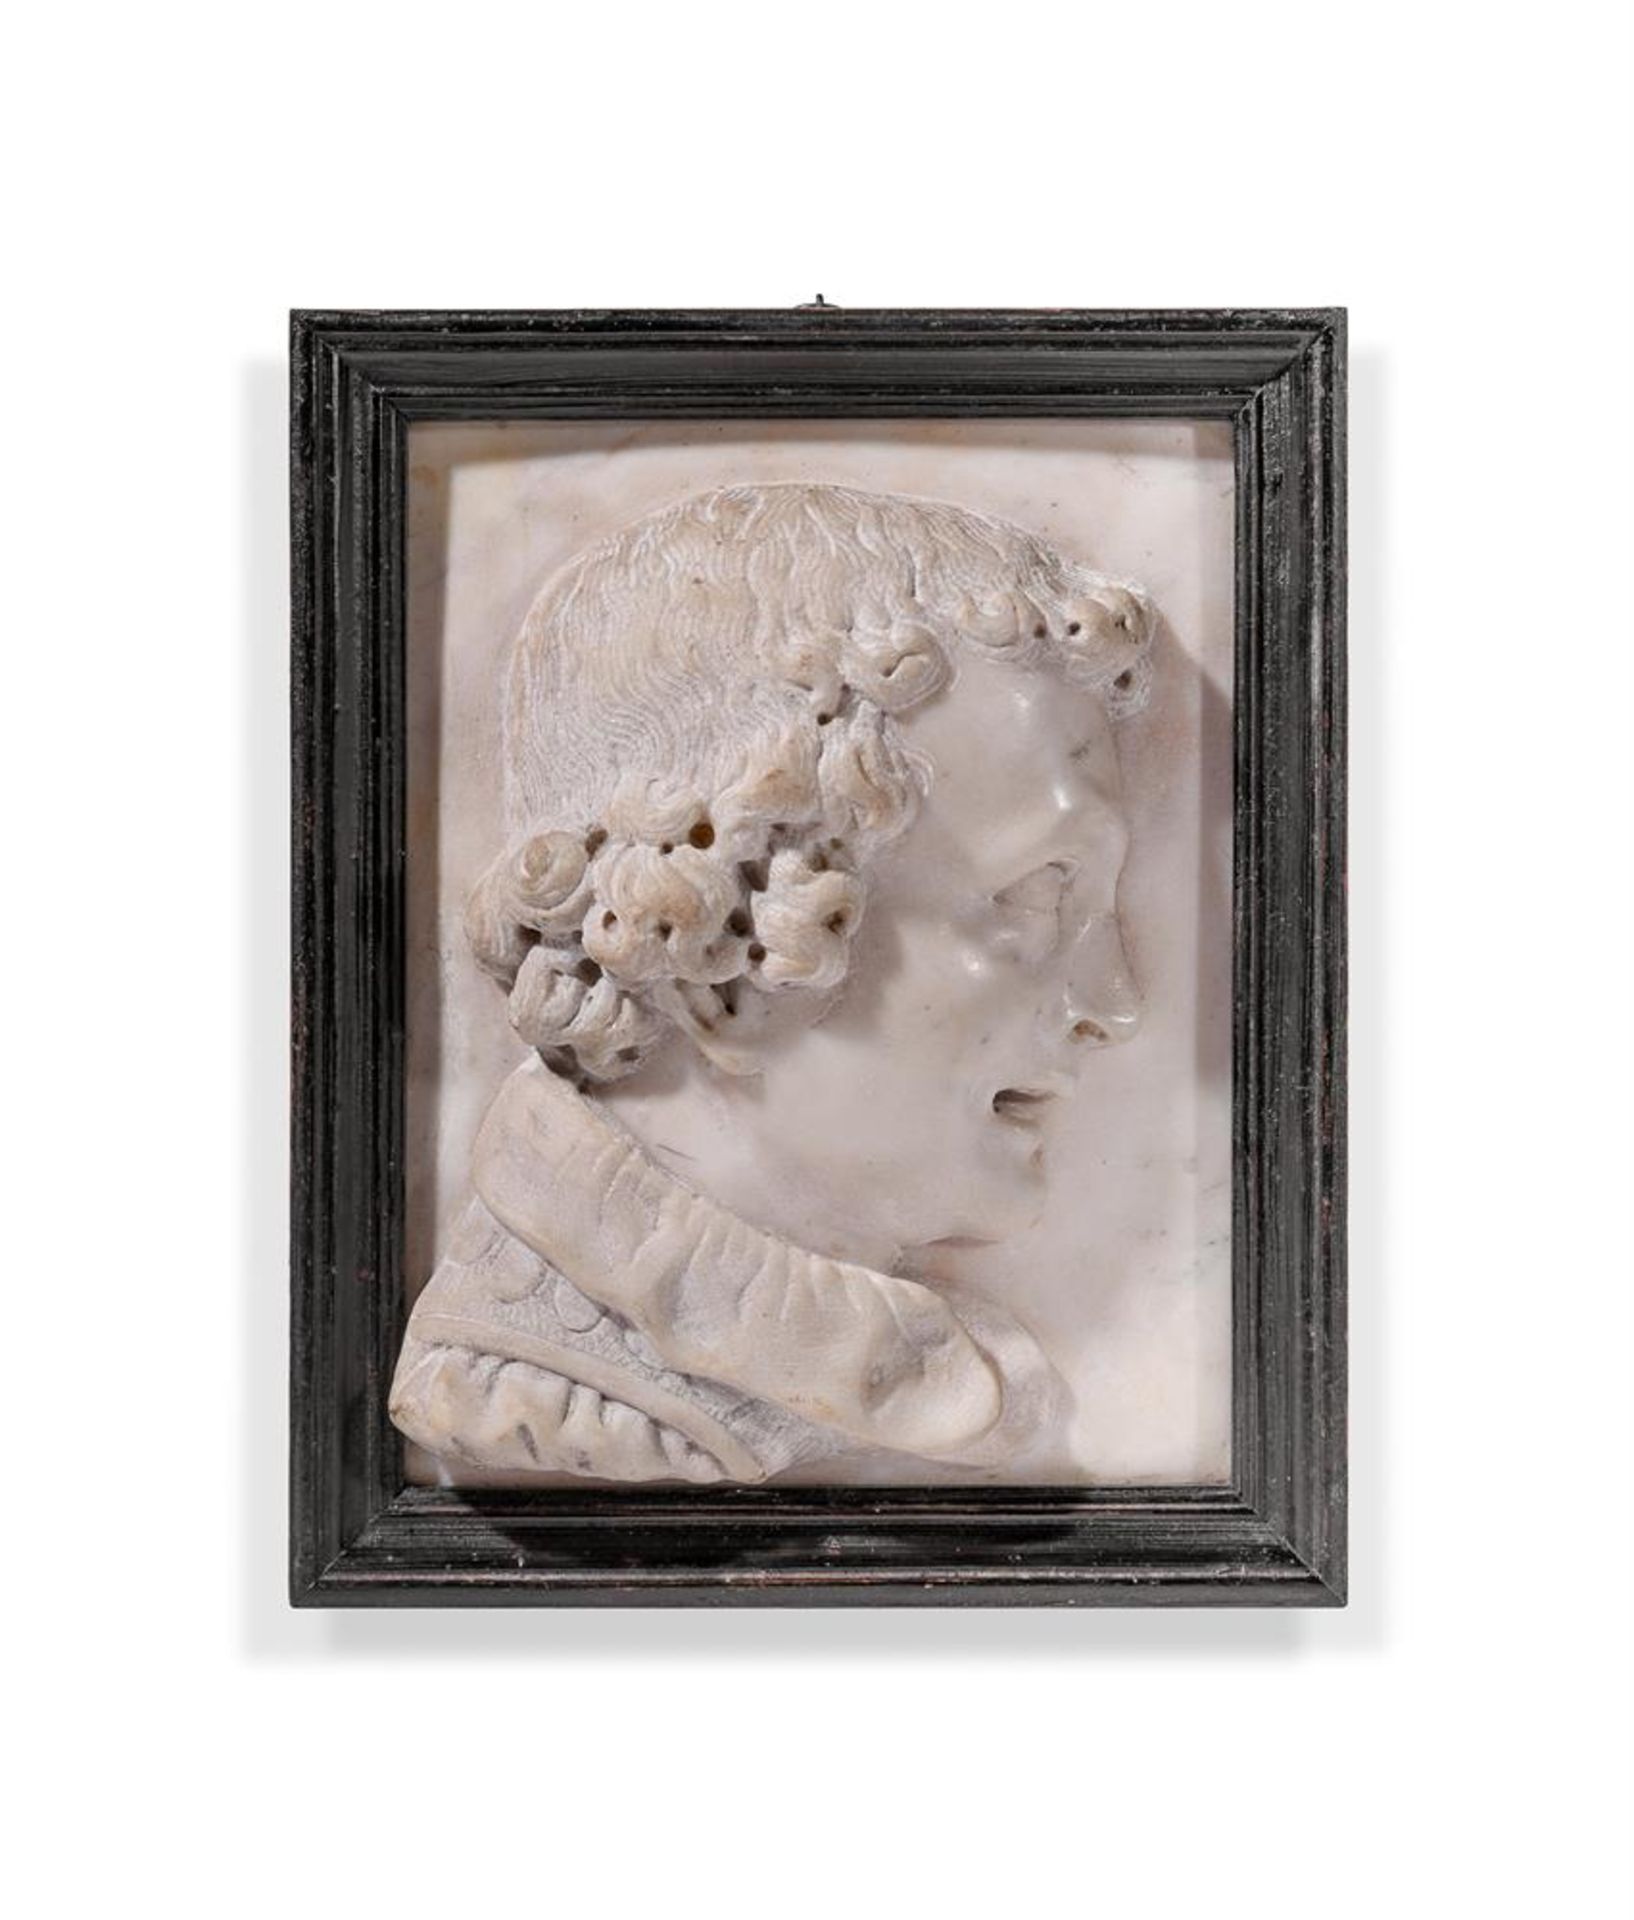 GIOVANNI BONAZZA (1654-1736) A WHITE MARBLE PROFILE RELIEF OF A MAN, EARLY 18TH CENTURY